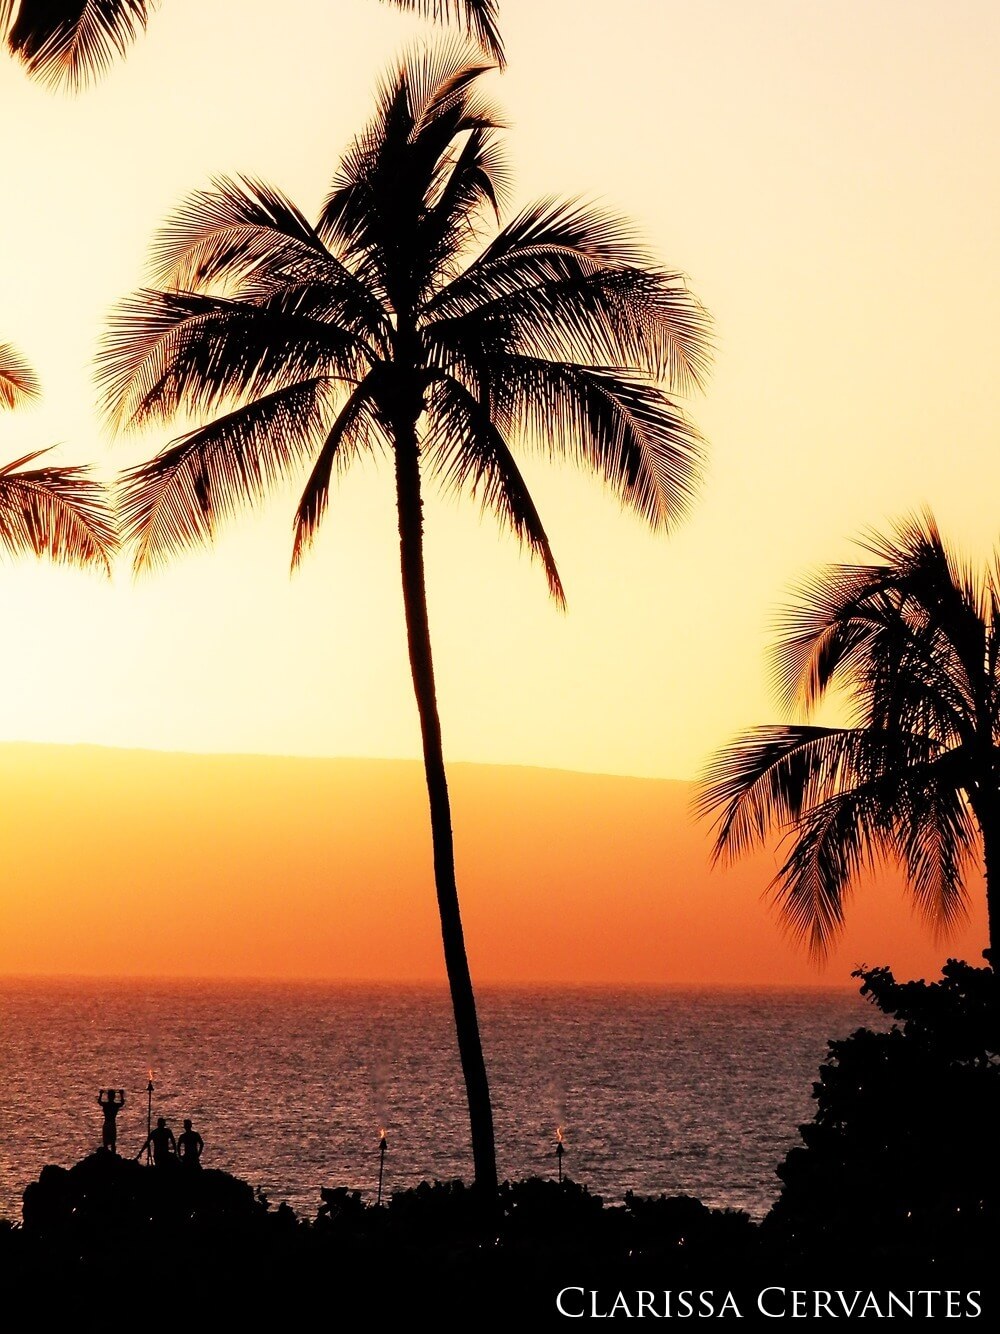 Palm tree silhouette with ocean horizon in the distance, orange and yellow skys as the sun sets.